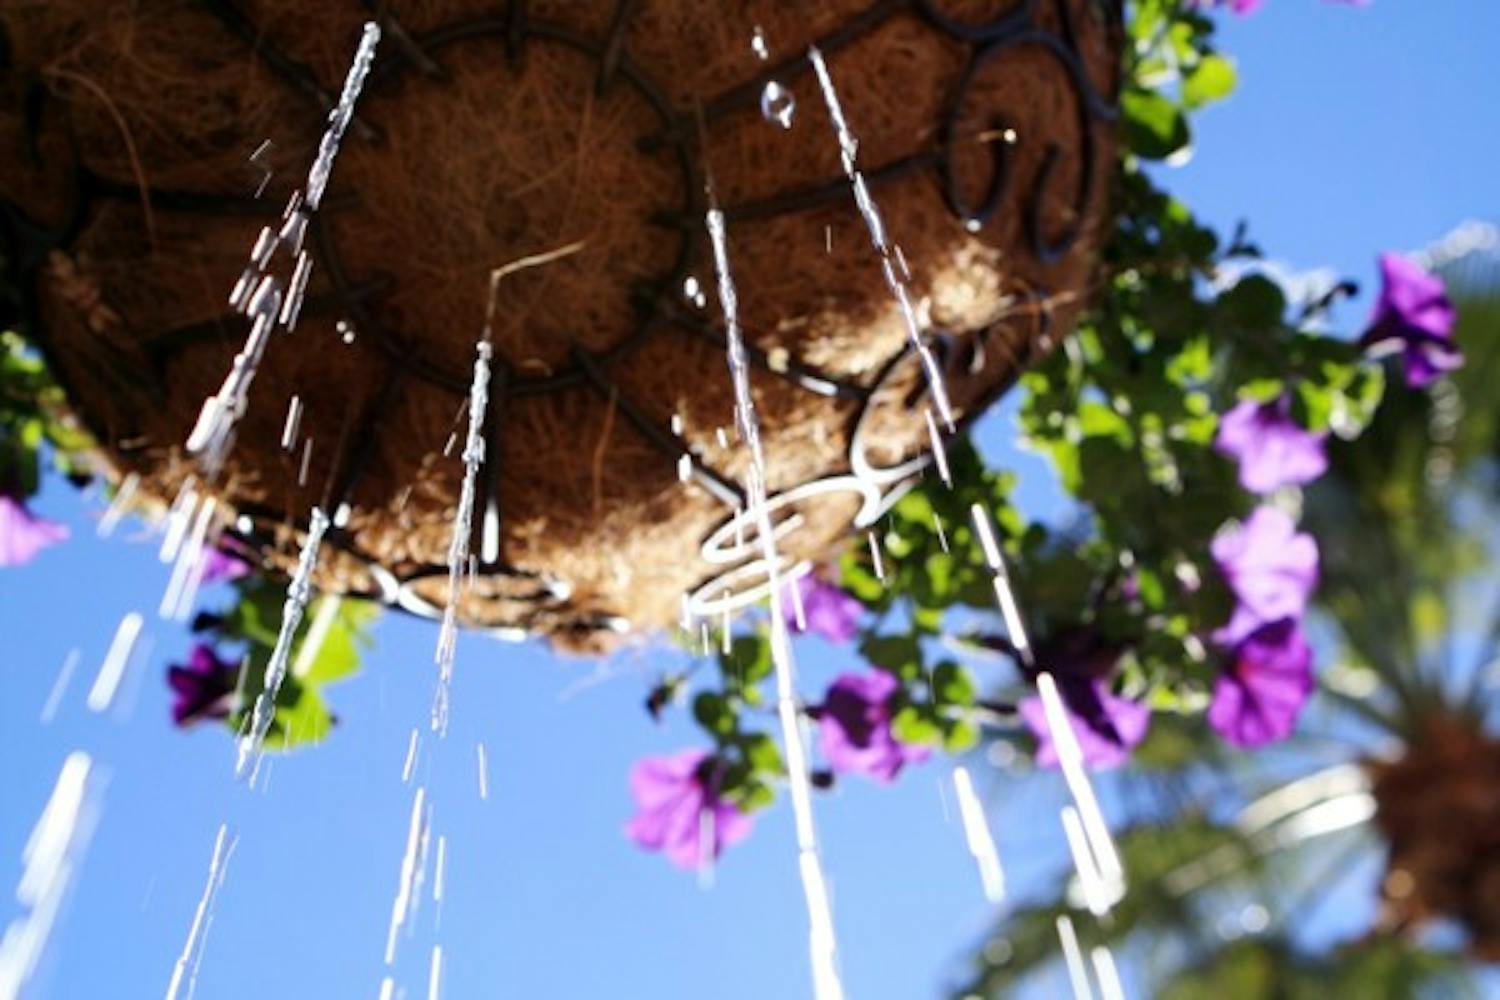 Excess water drips out of flower pots that hang on palm trees along Hayden Mall. (Photo by Jessie Wardarski)